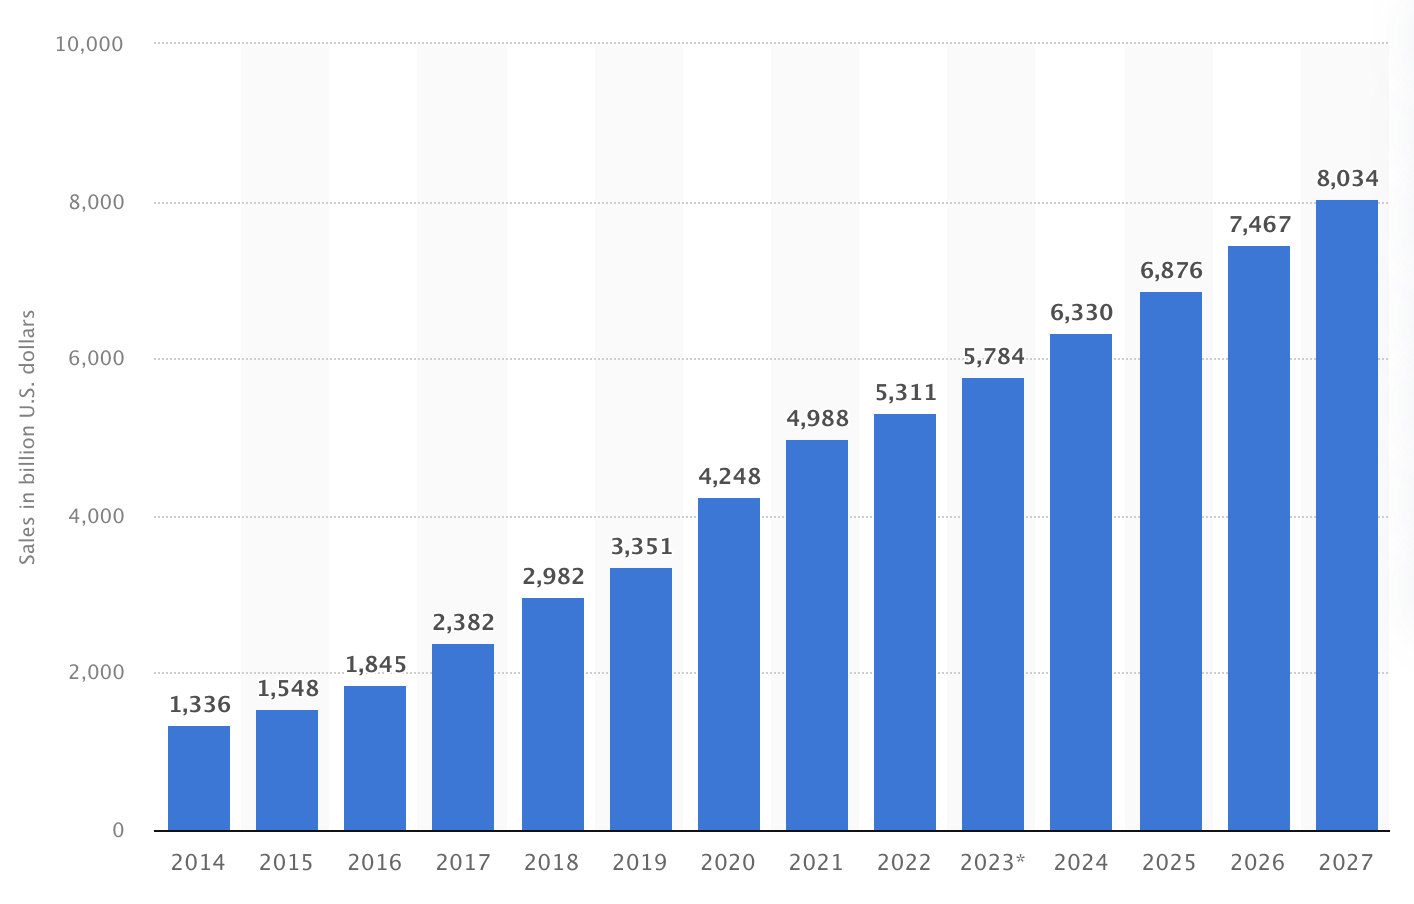 Retail e-commerce sales worldwide from 2014 to 2027 (in billions)